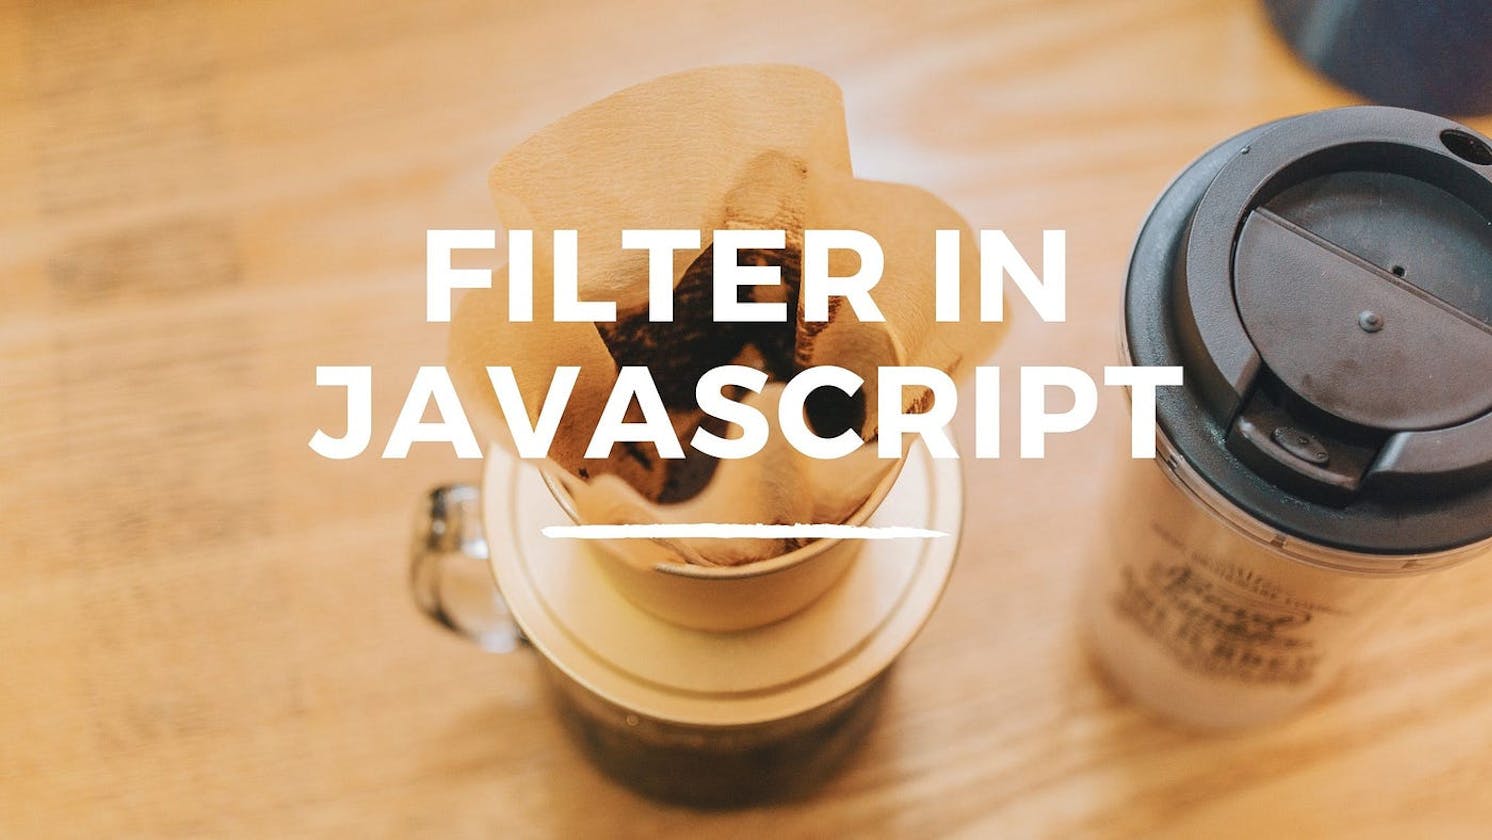 How to Filter Data (Object in Array) and Render the Output in the Browser Using JavaScript